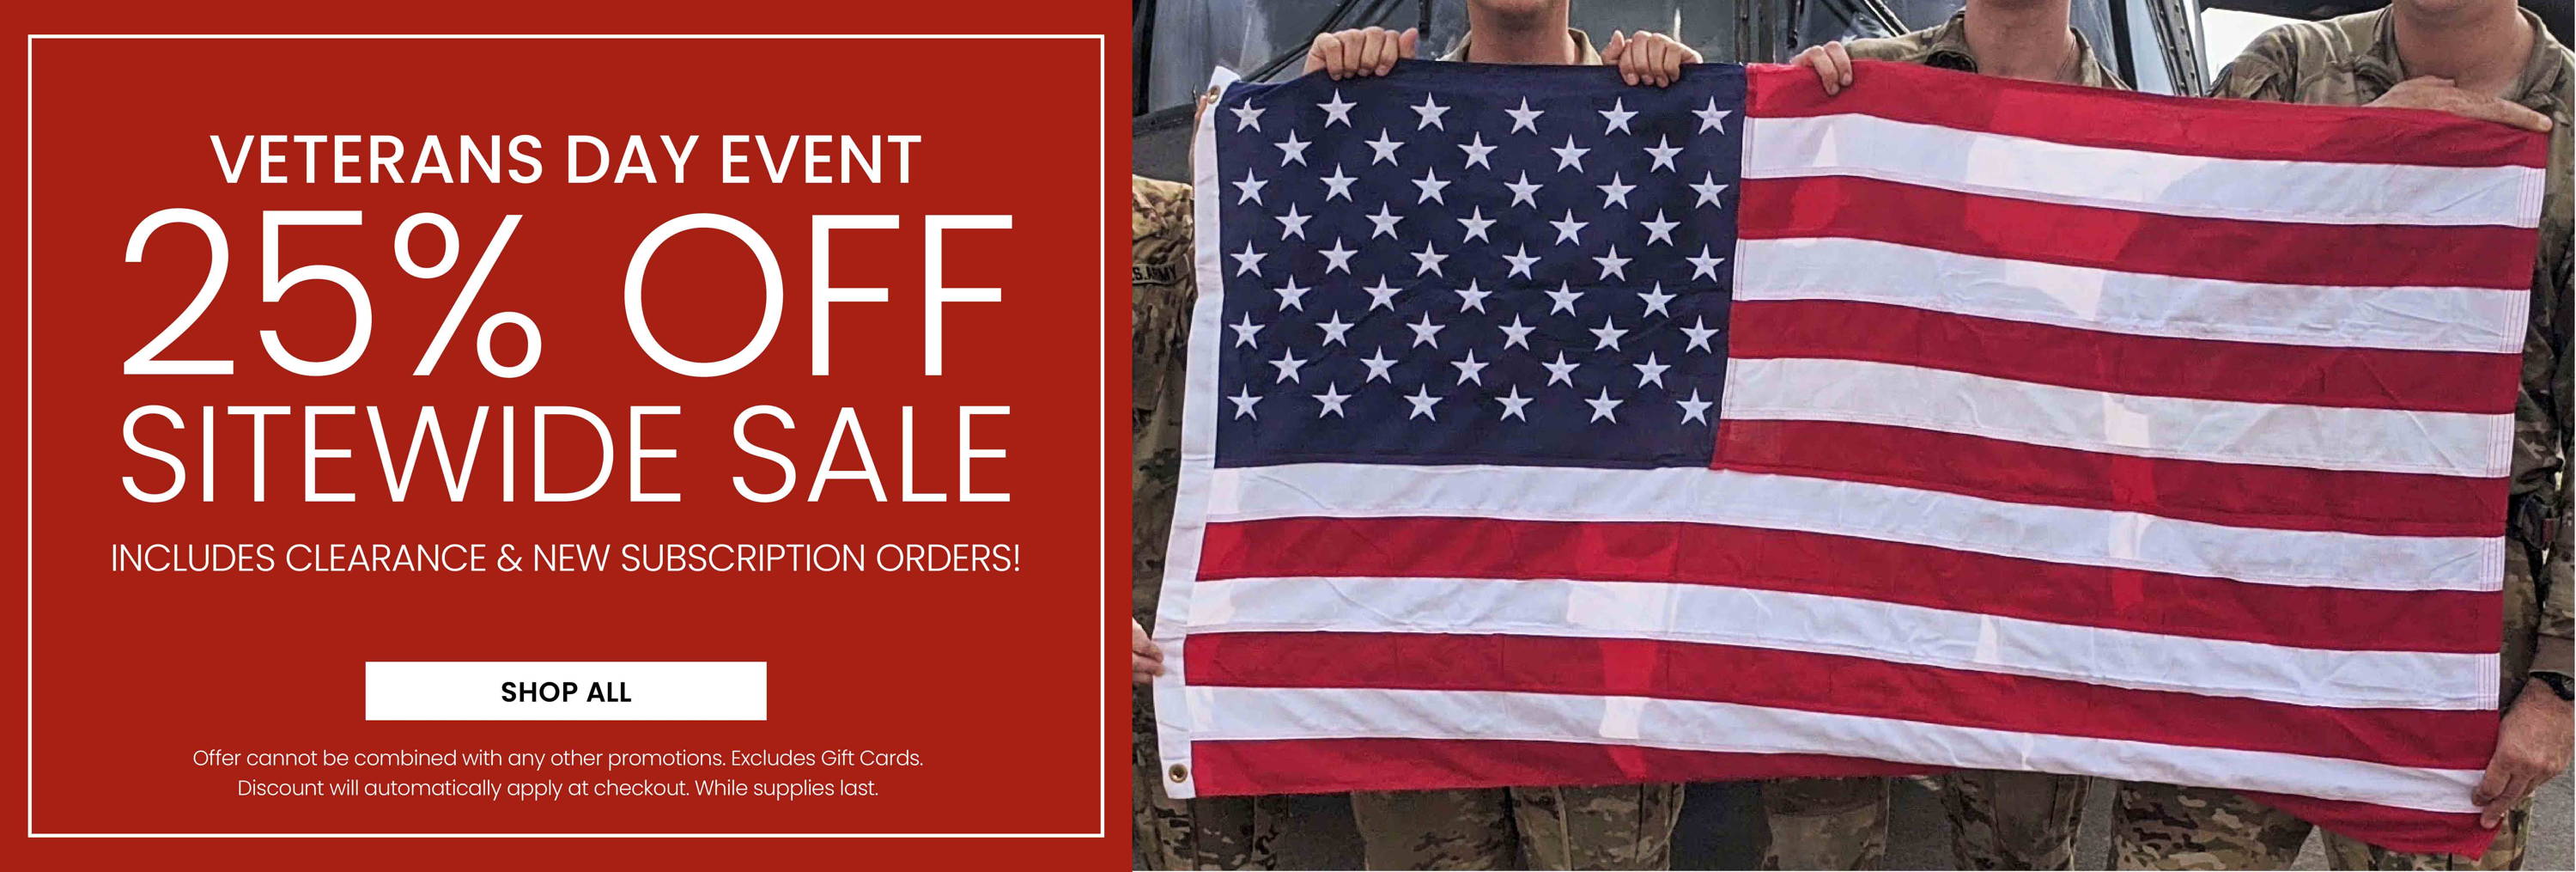 25% Off Sitewide Veterans Day Sale. Includes Clearance & New Subscription Orders. Discount applied in cart. Exclude Gift Cards. While Supplies Last.